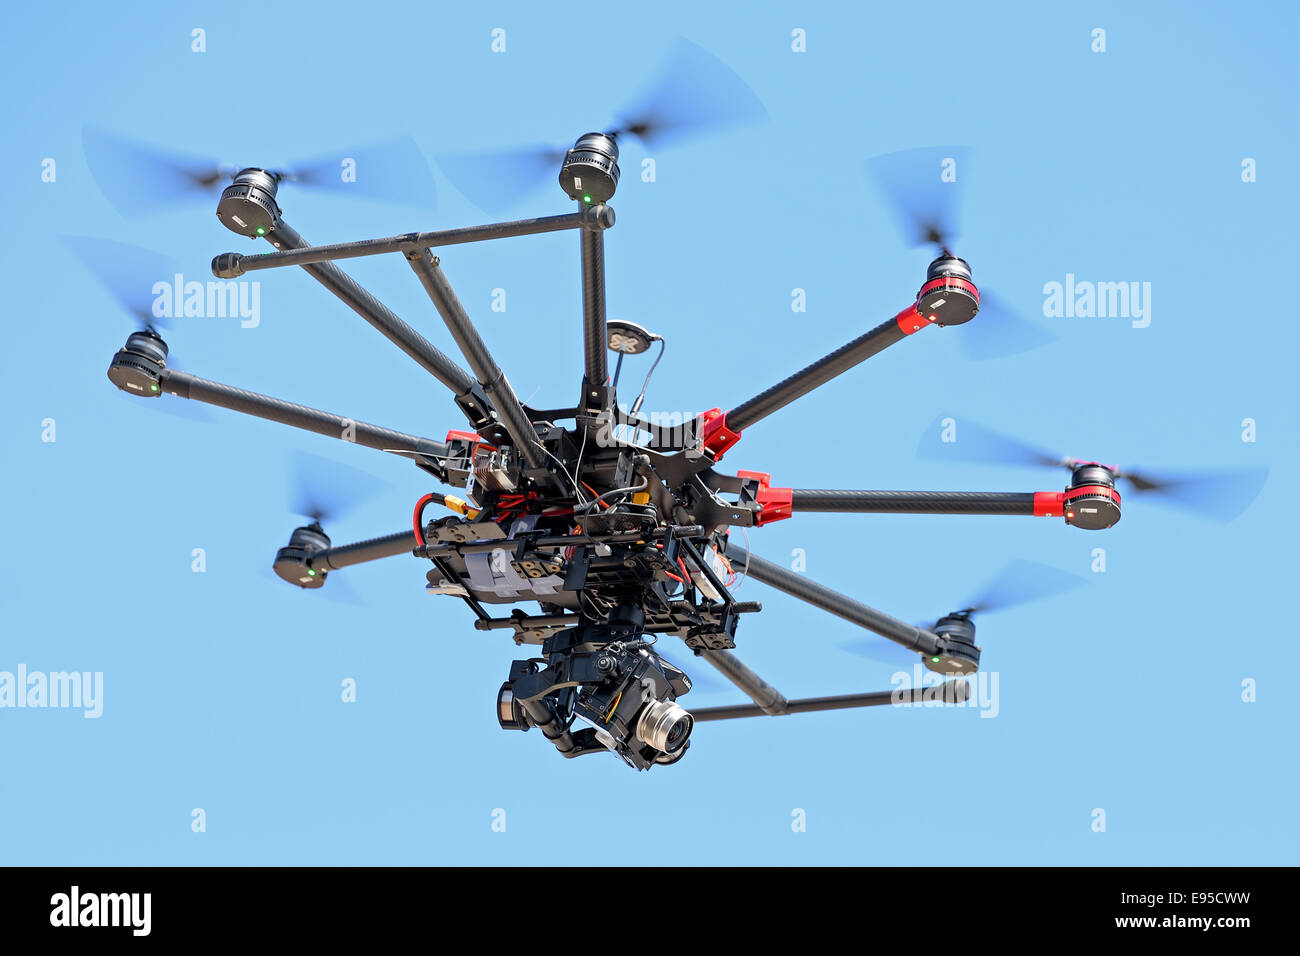 BARCELONA - JUN 28: A drone controlled by remote control, to take pictures and video recording at LKXA Extreme Sports Barcelona. Stock Photo